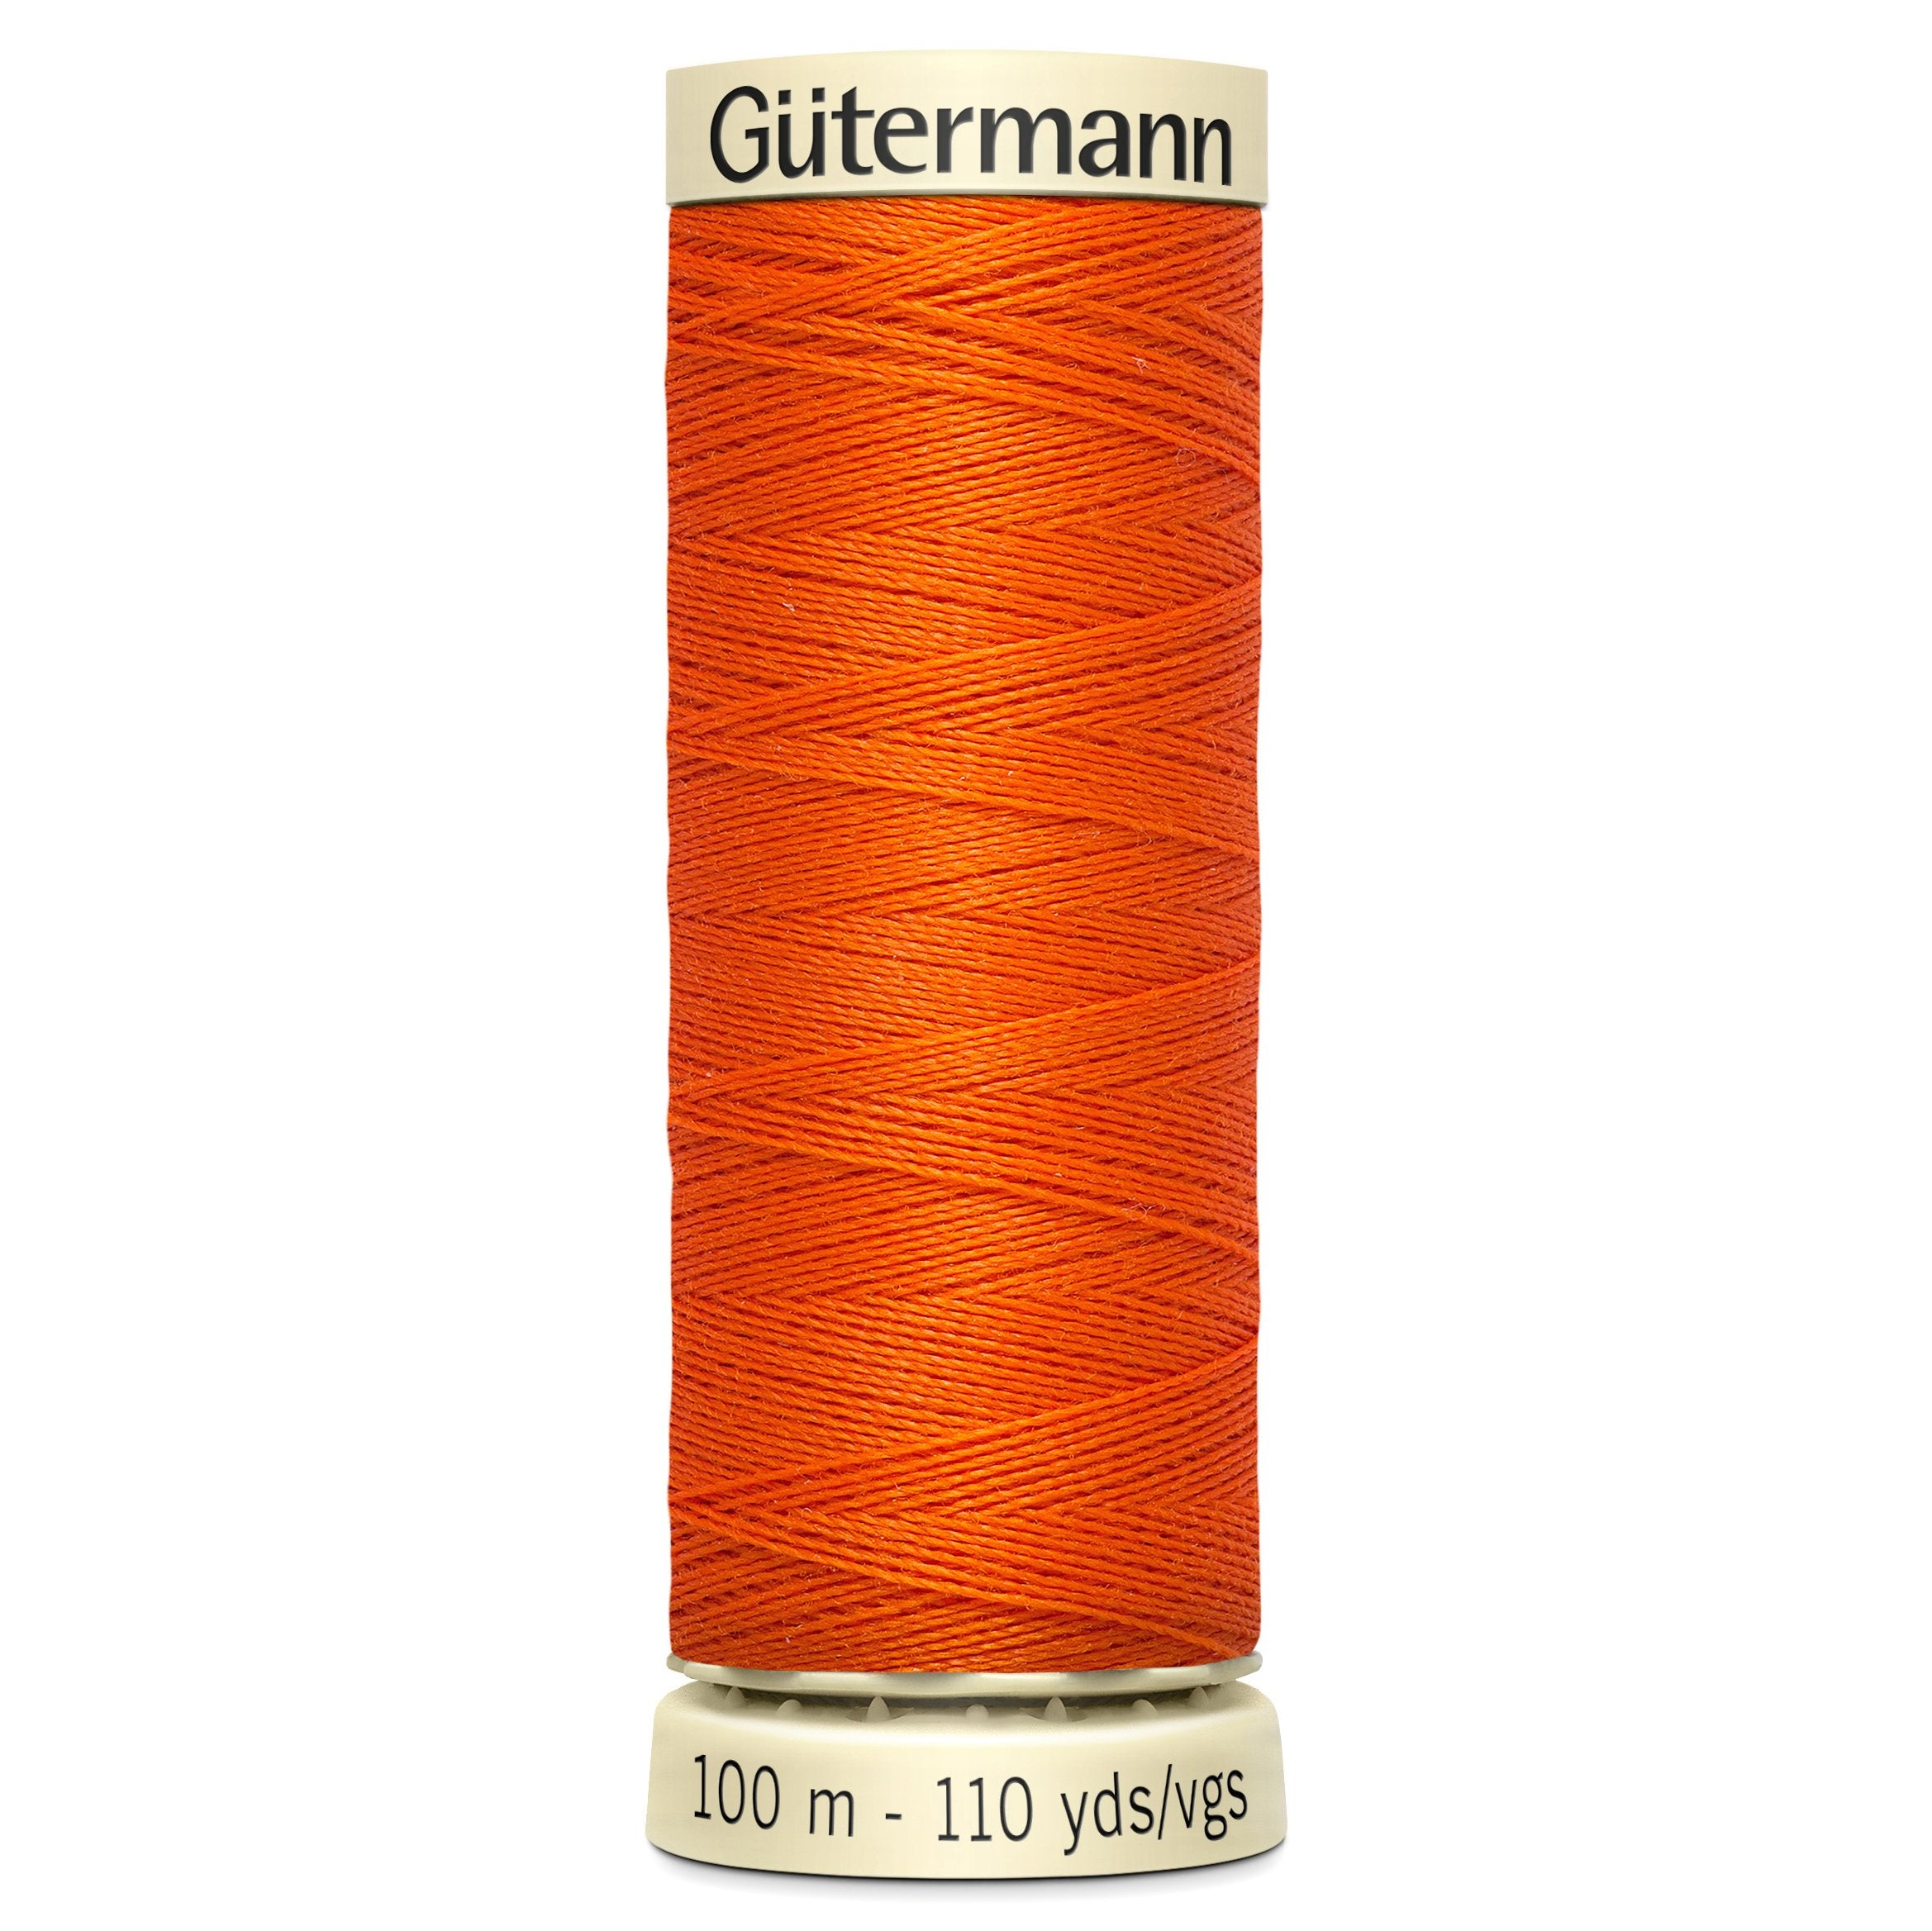 Gutermann Sew All Thread colour 351 Orange from Jaycotts Sewing Supplies